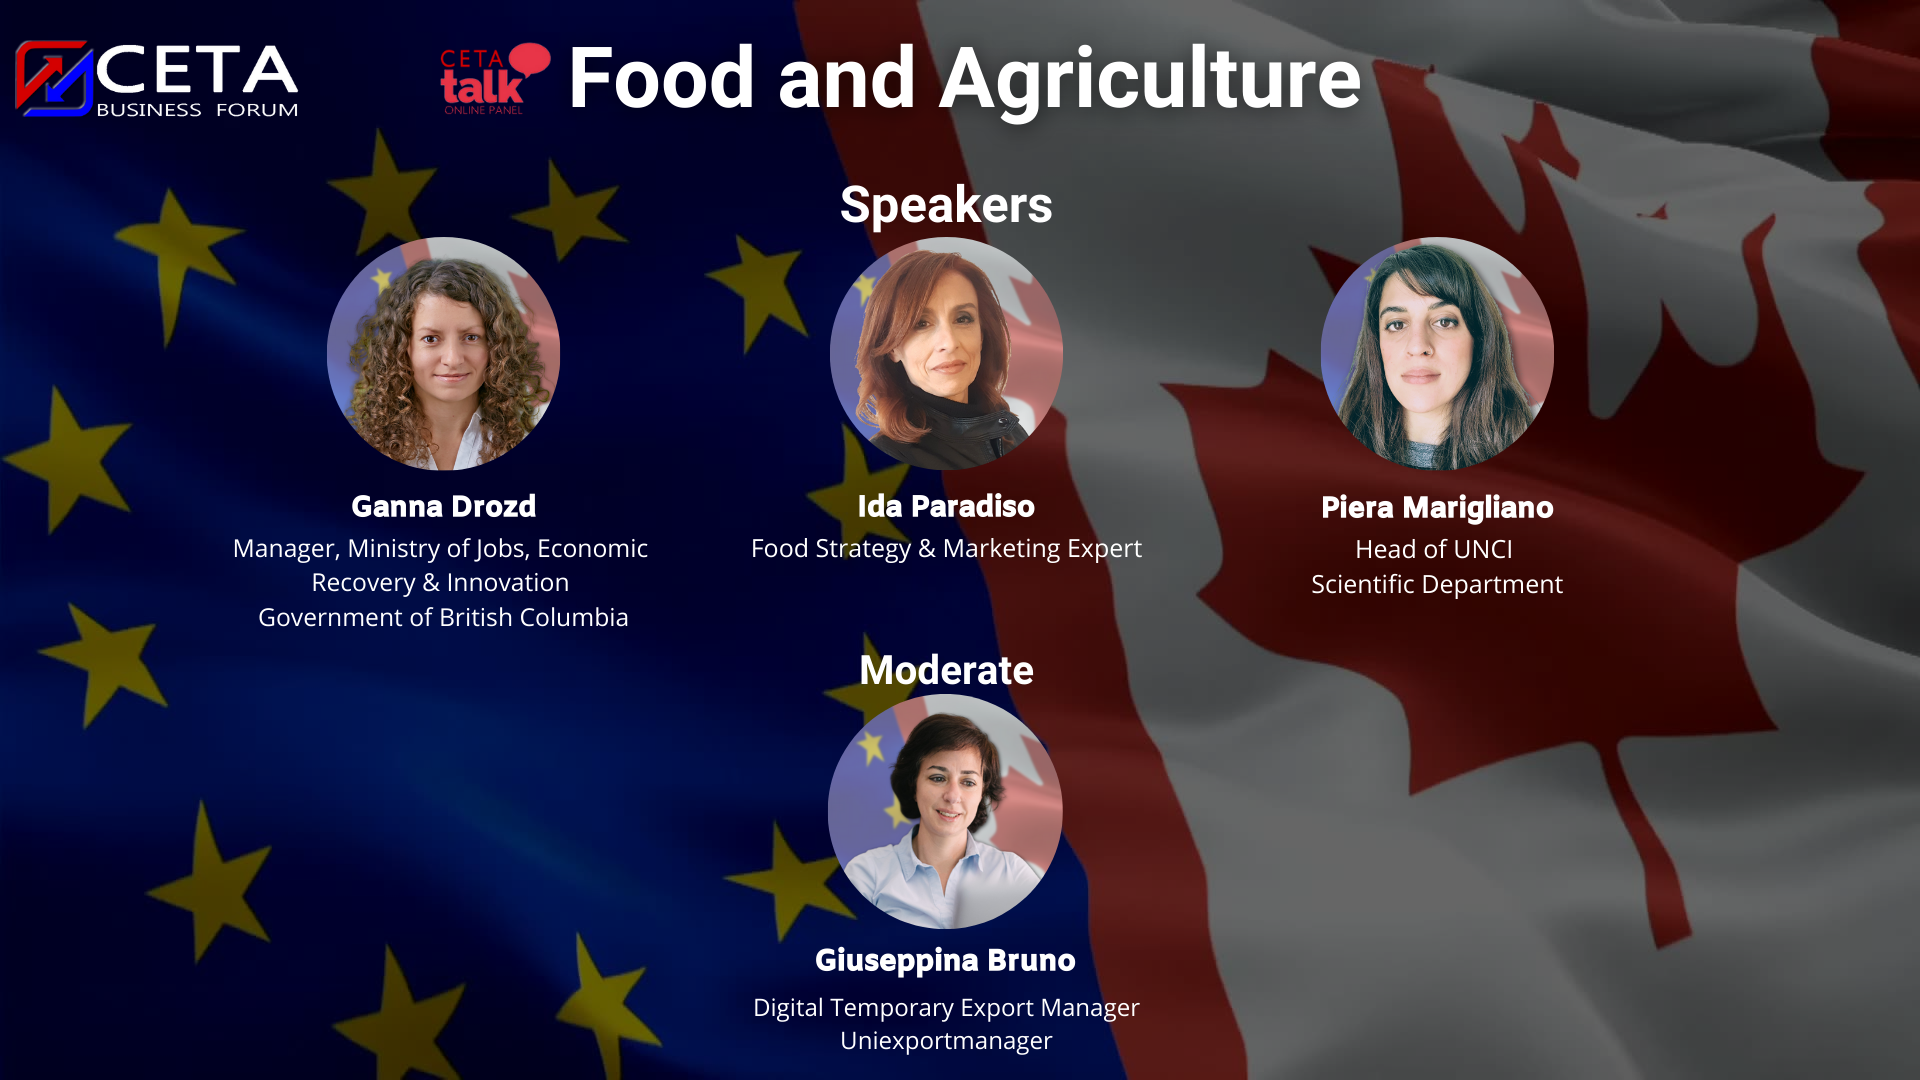 Image_Video_CETA_Talk_Food_and_Agriculture